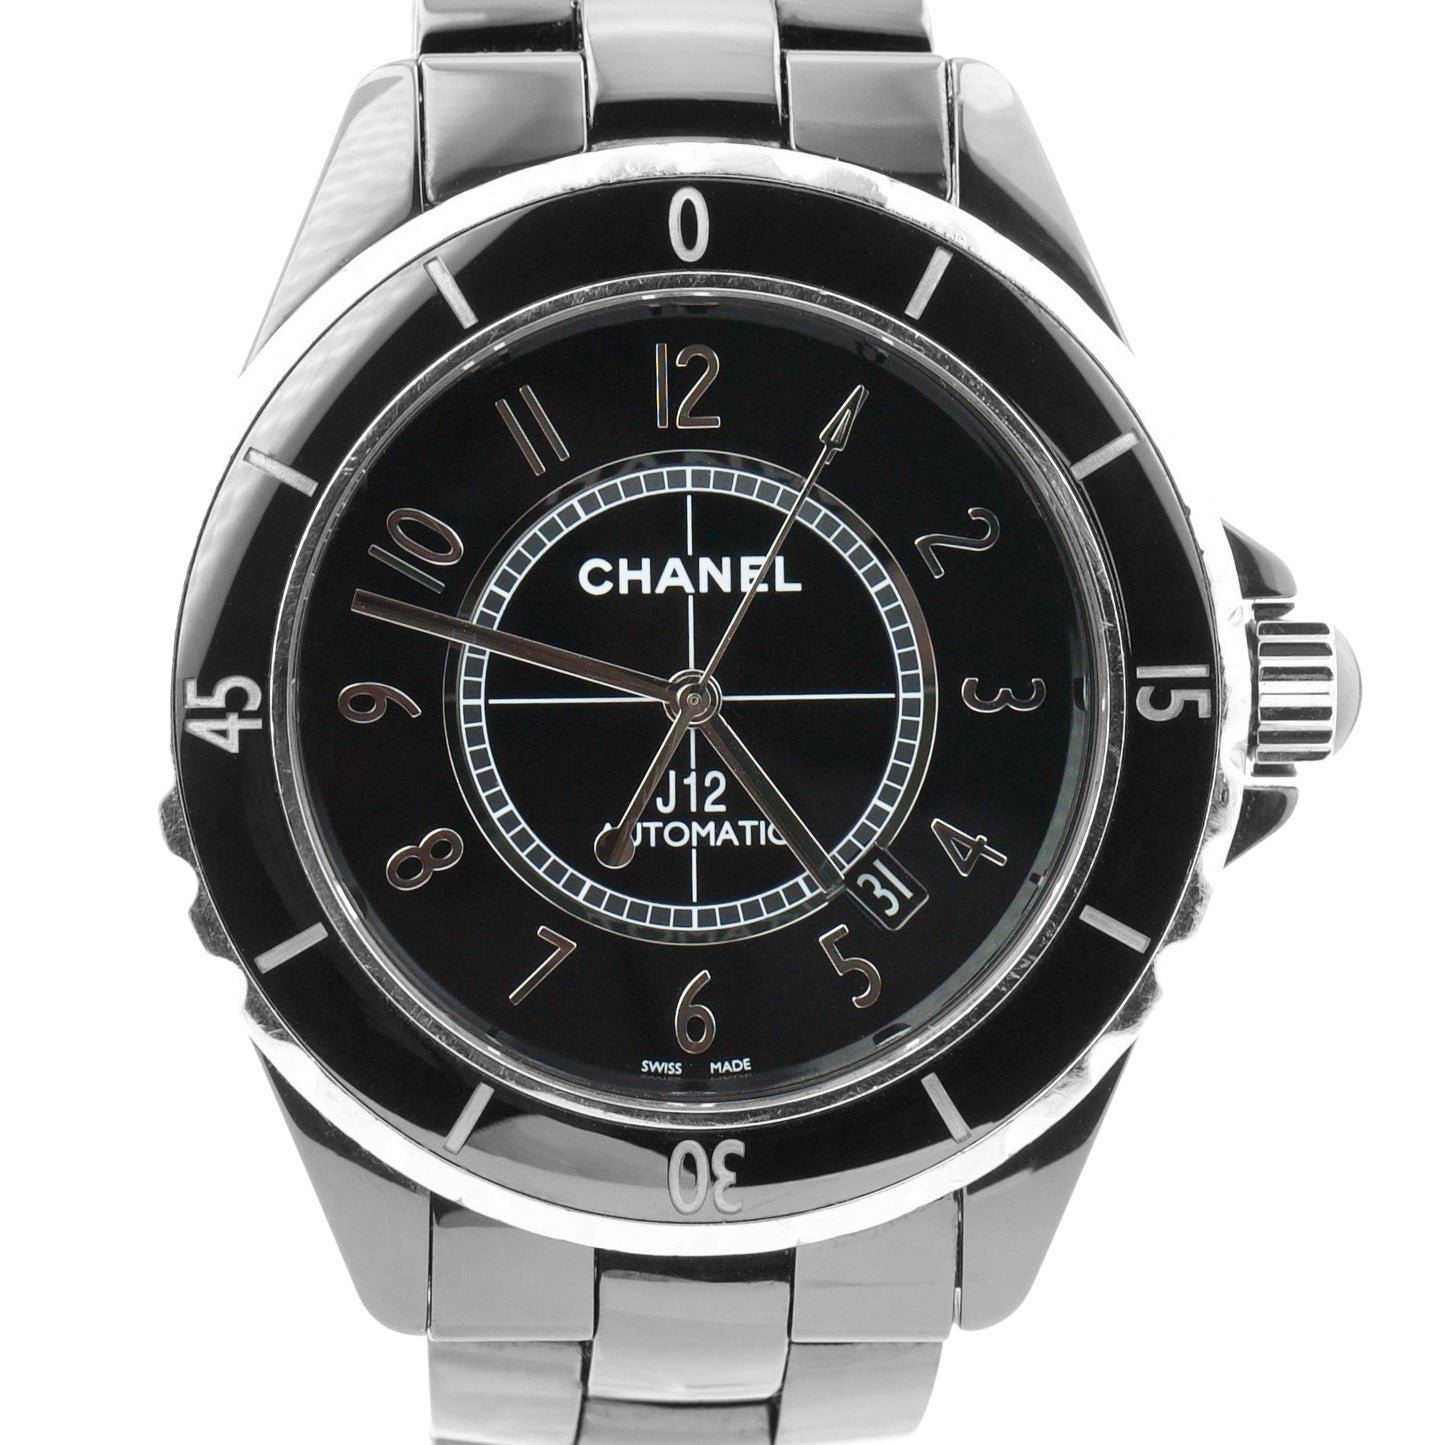 Chanel J12 Black Ceramic Stainless Steel Automatic 42mm Chronograph Watch H3131